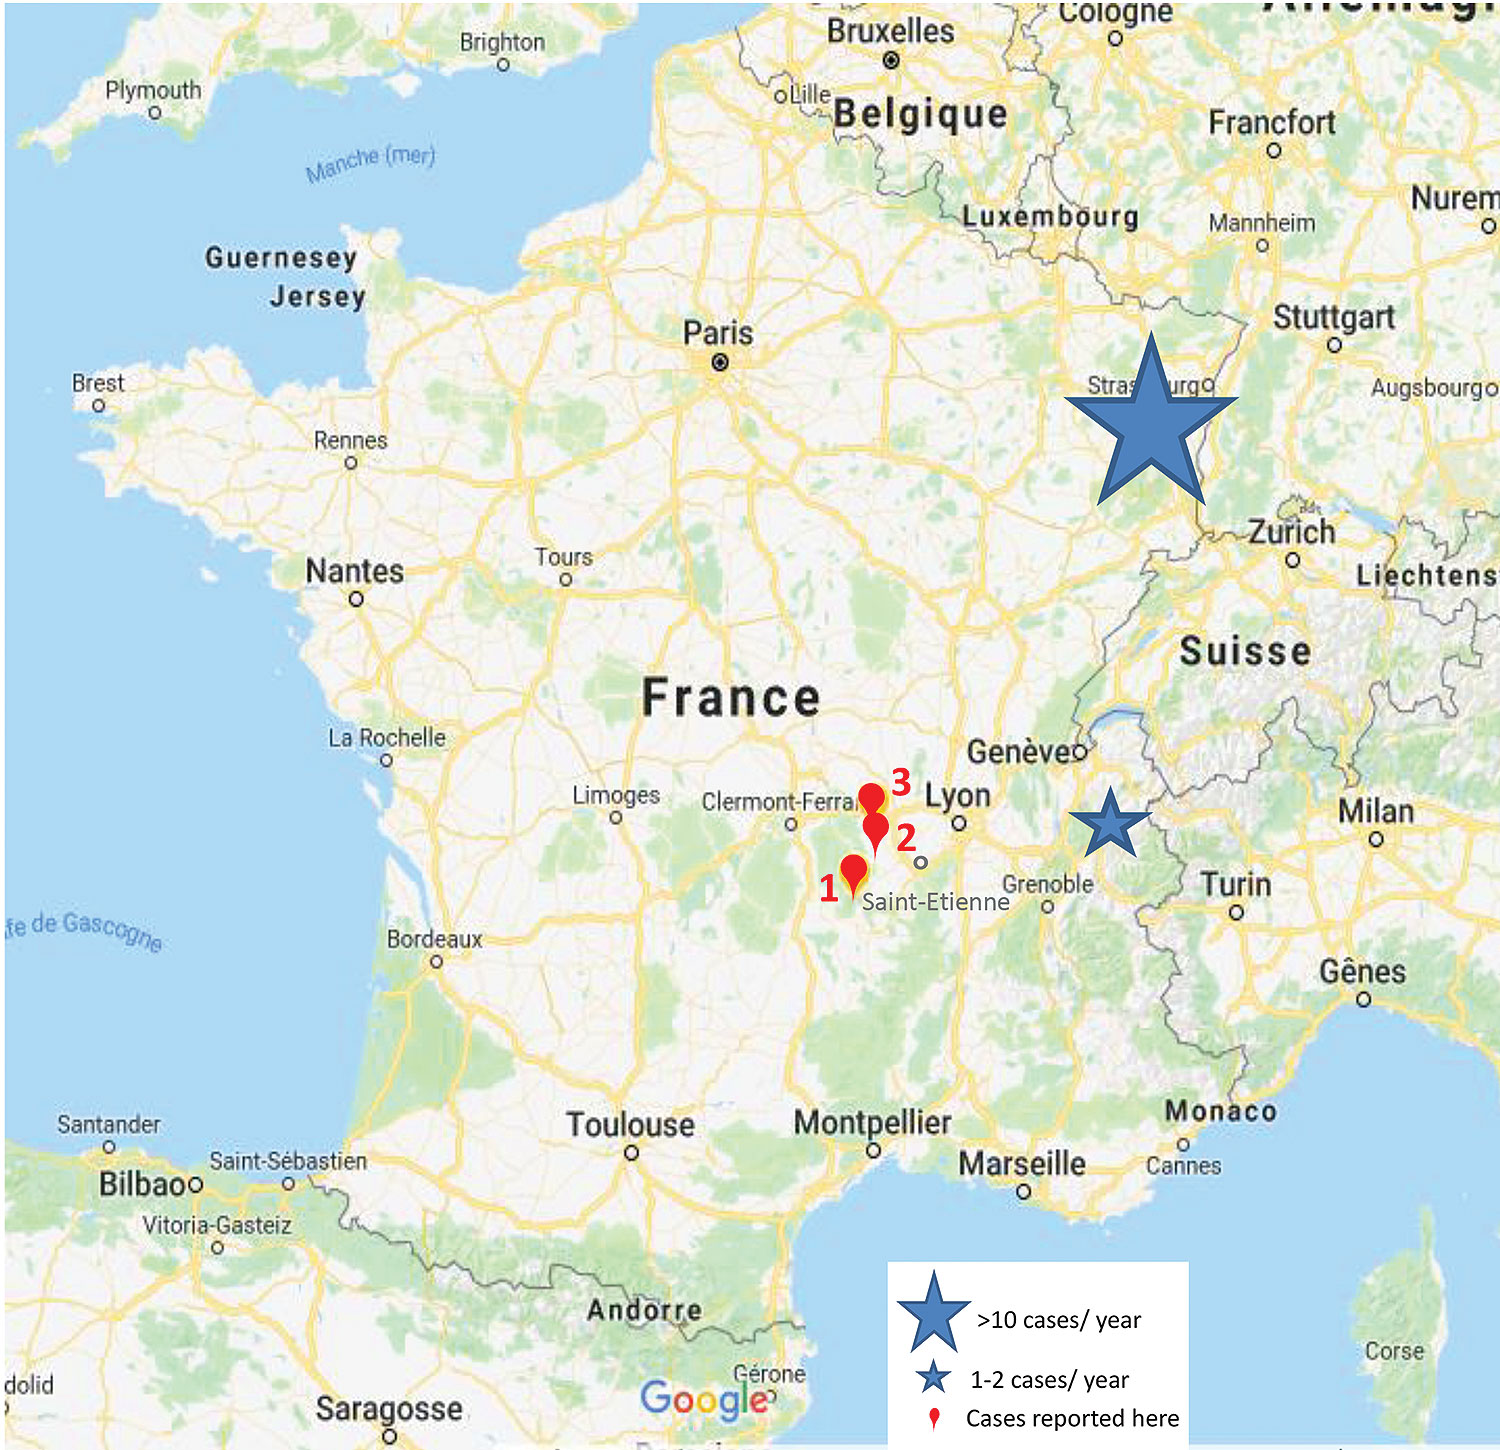 Areas of the Auvergne-Rhône-Alpes region of France visited by 2 patients and inhabited by 1 patient who acquired tick-borne encephalitis during 2017–2018. Red flags and text indicate locations and case-patient numbers.